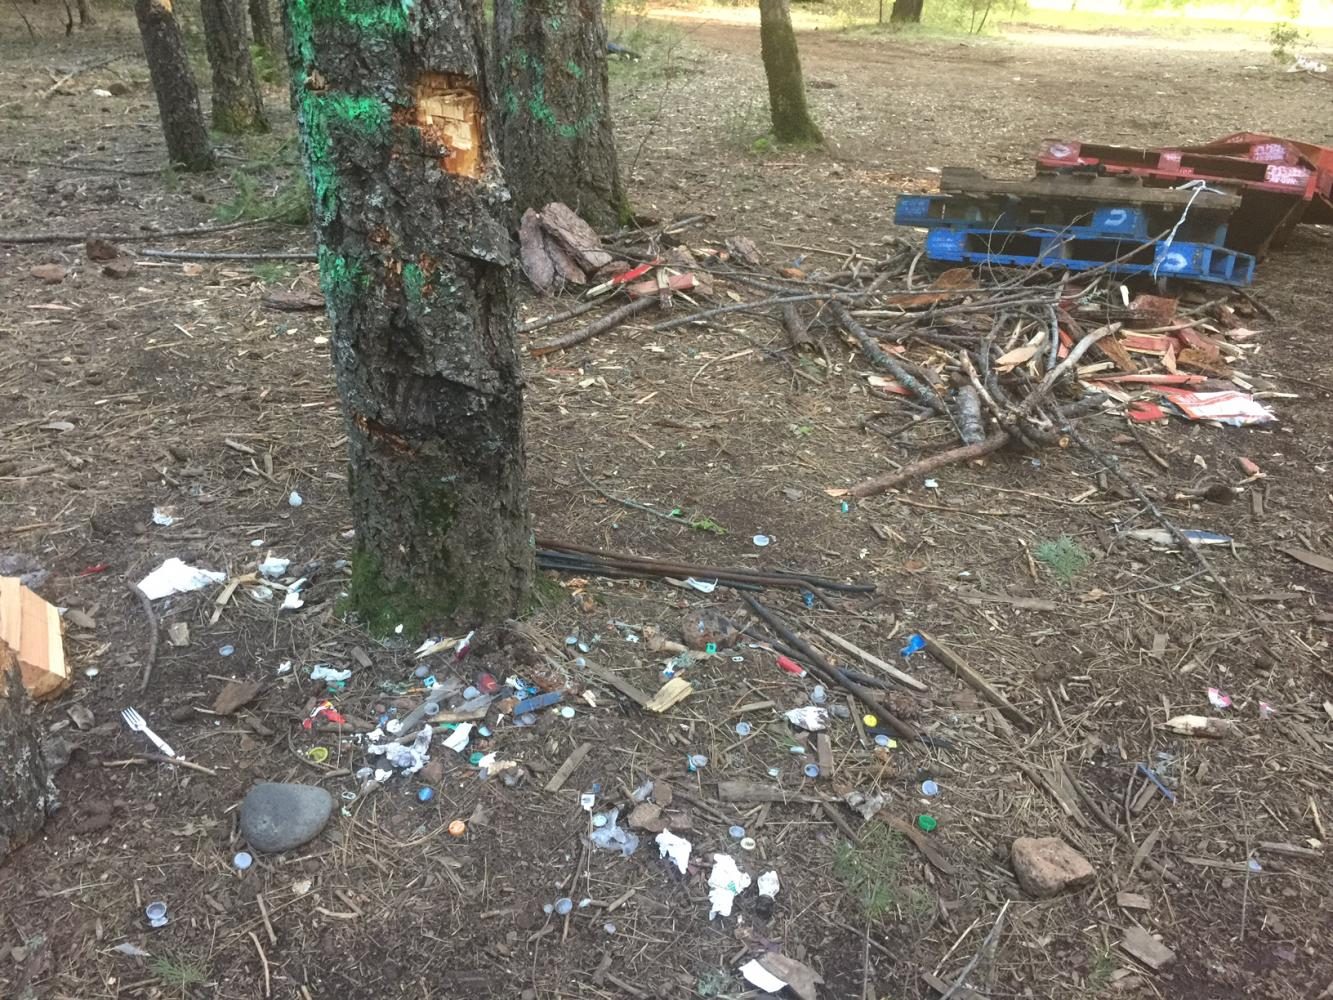 Fraternity being investigated for trashing campsite